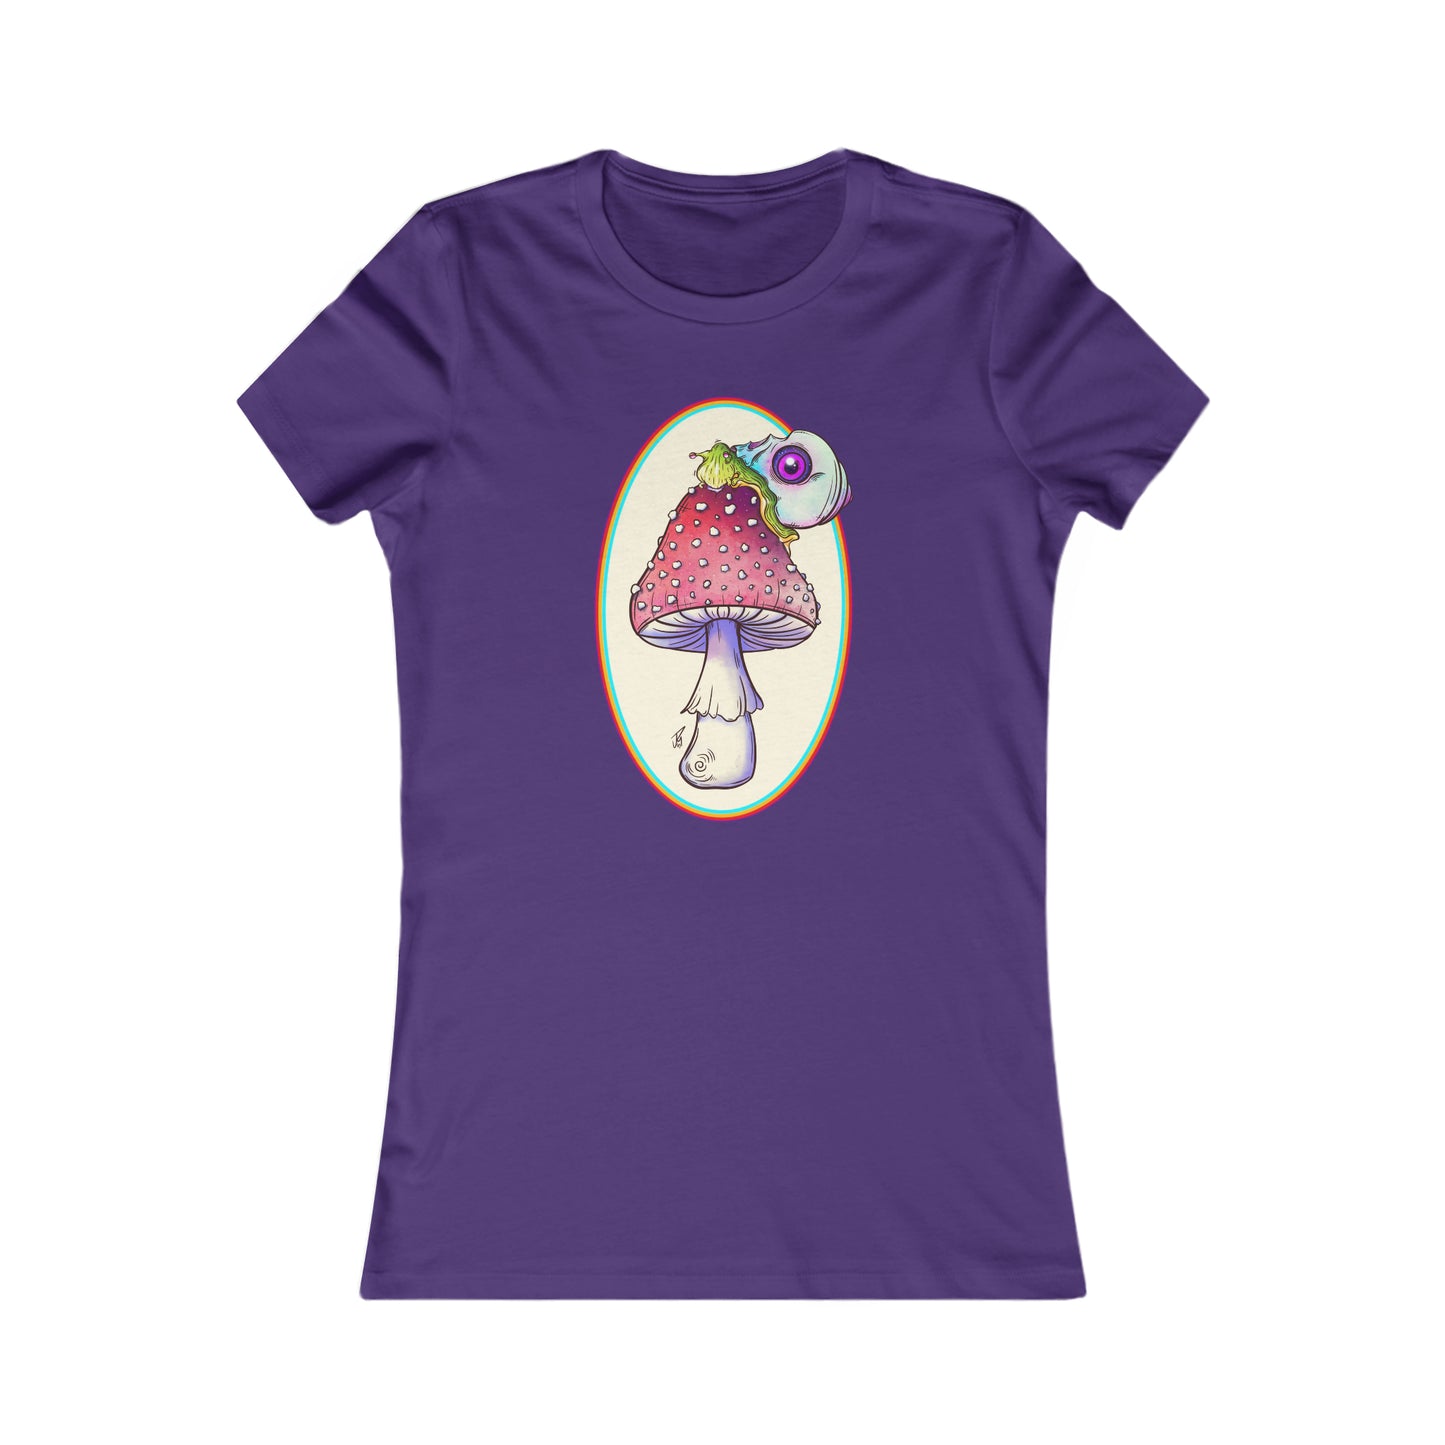 Food For Thought Women's Tee T-Shirt Printify S Team Purple 